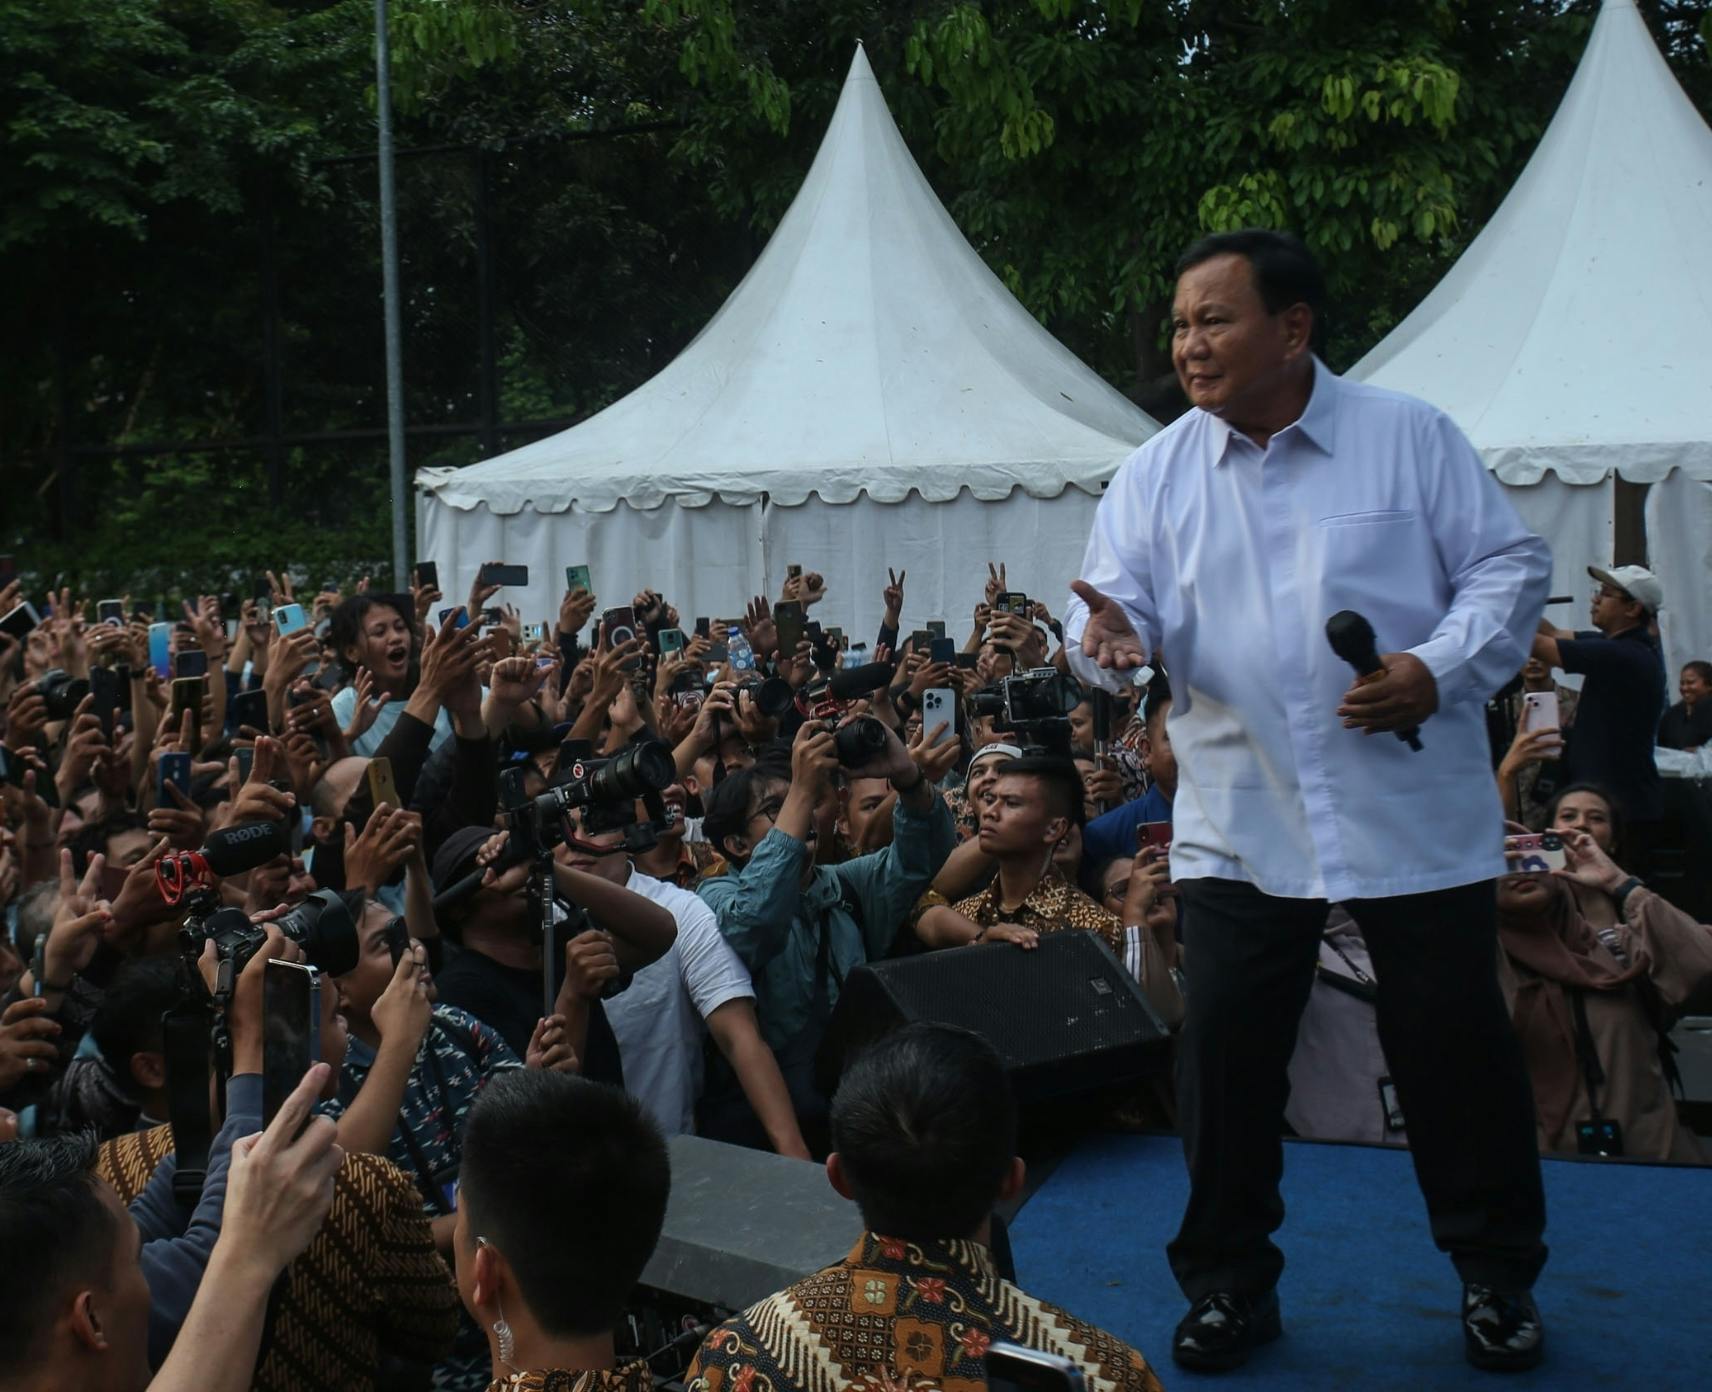 Prabowo Subianto shows off his 'gemoy' dance moves during a campaign event.